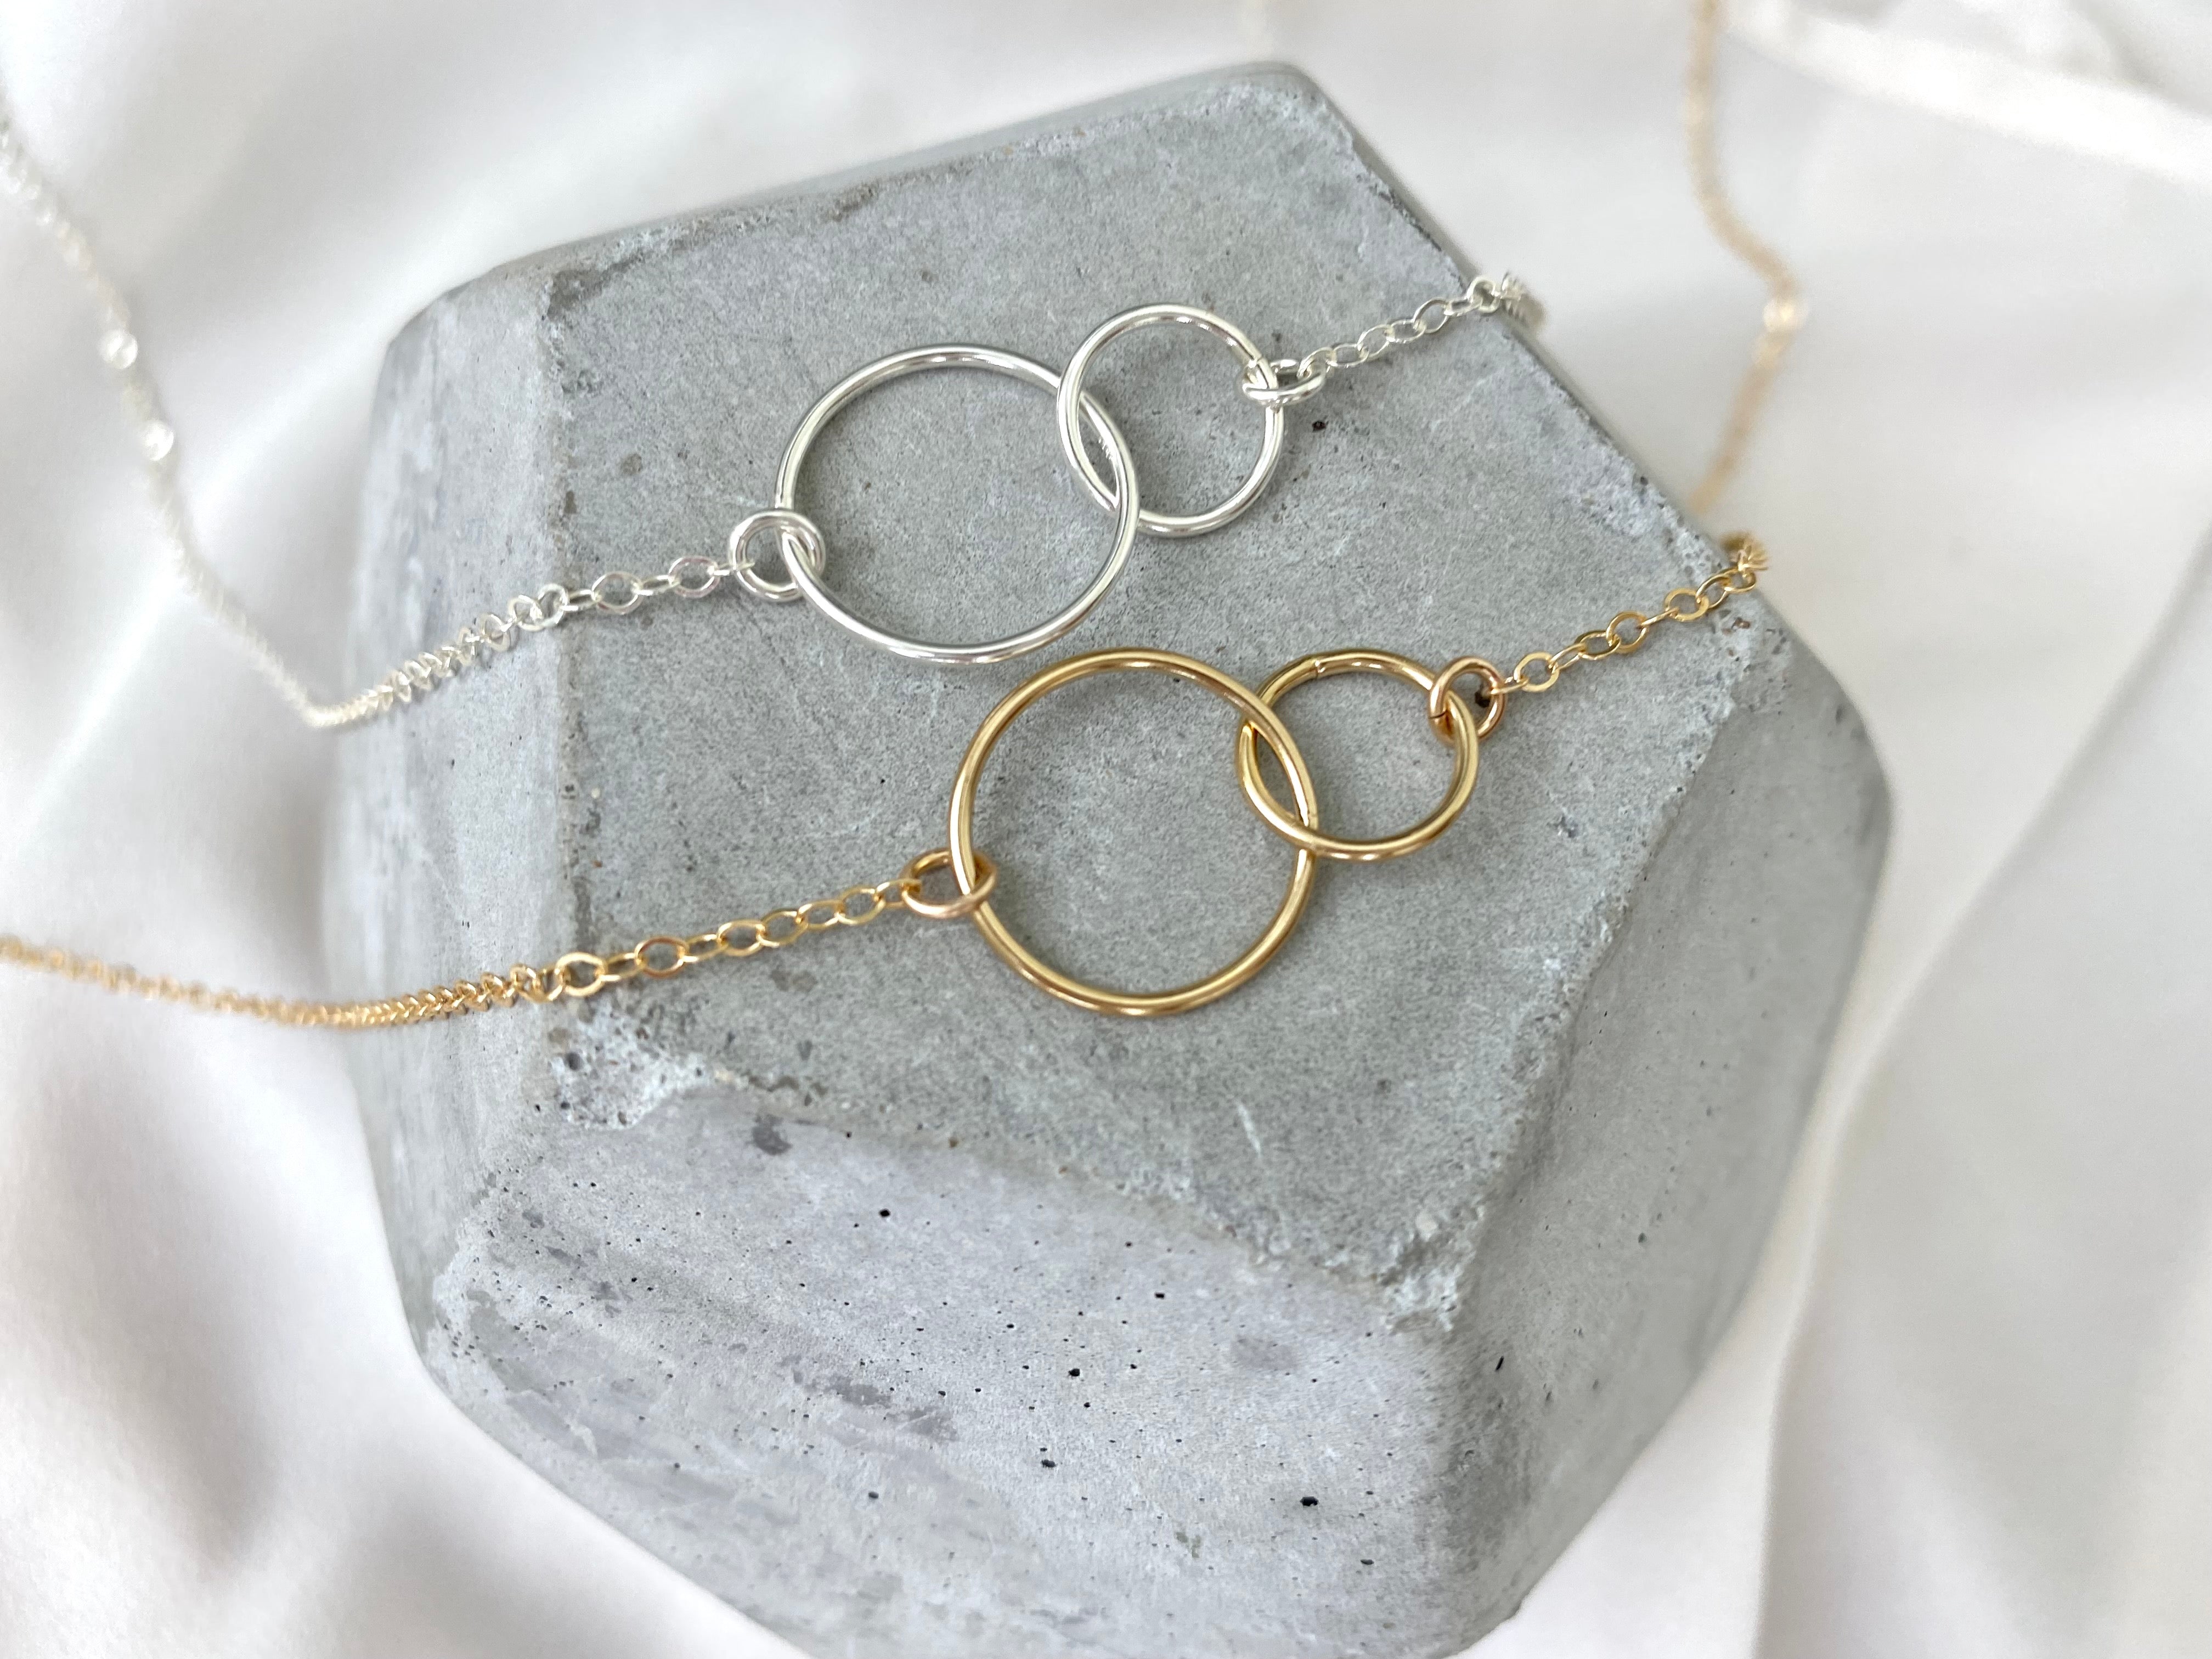 Dainty Linked Circles Pendant Necklace - Sterling Silver or Gold Filled